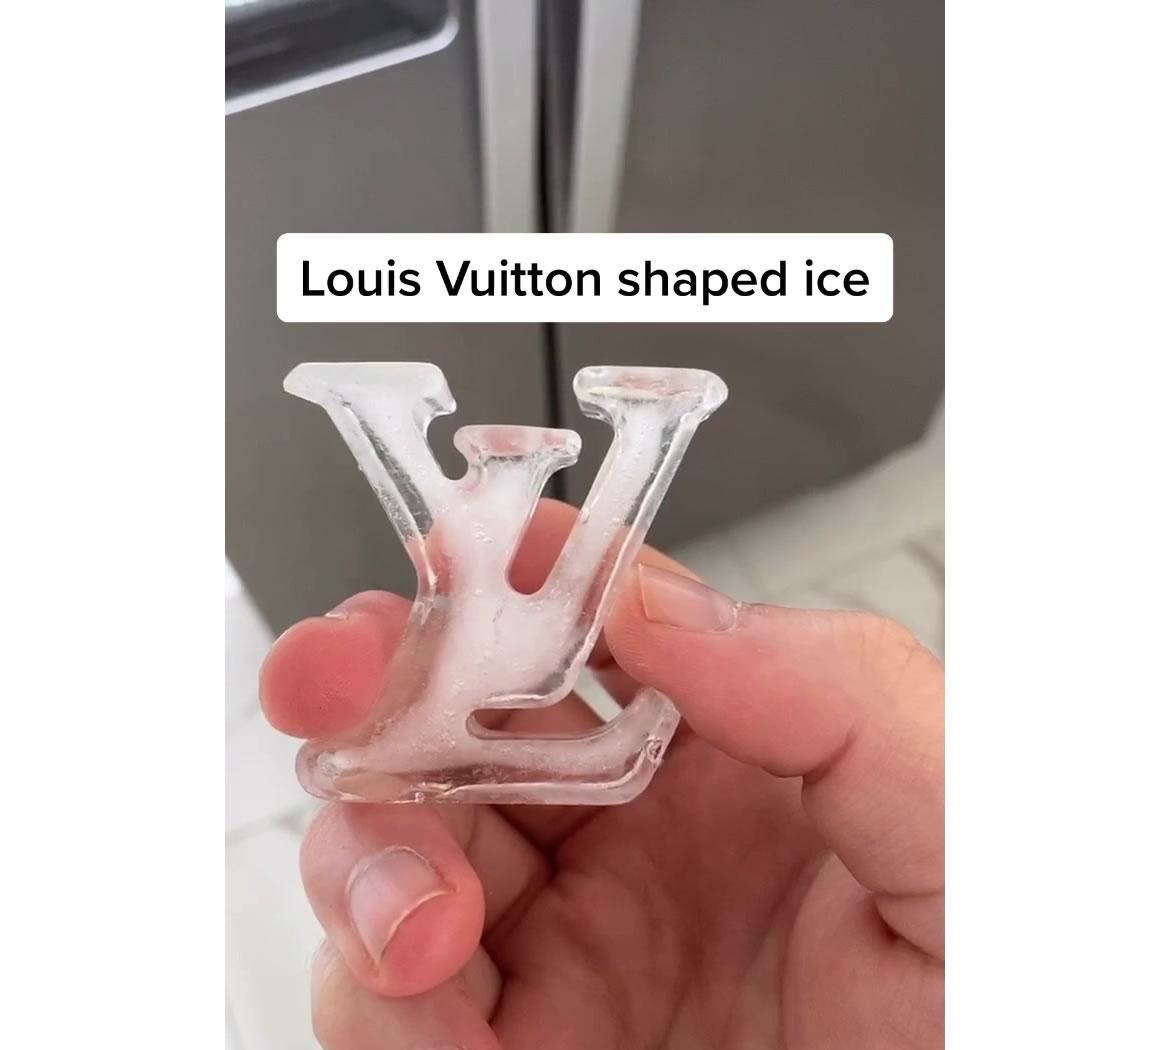 Video - A refrigerator that dispenses Louis Vuitton shaped ice